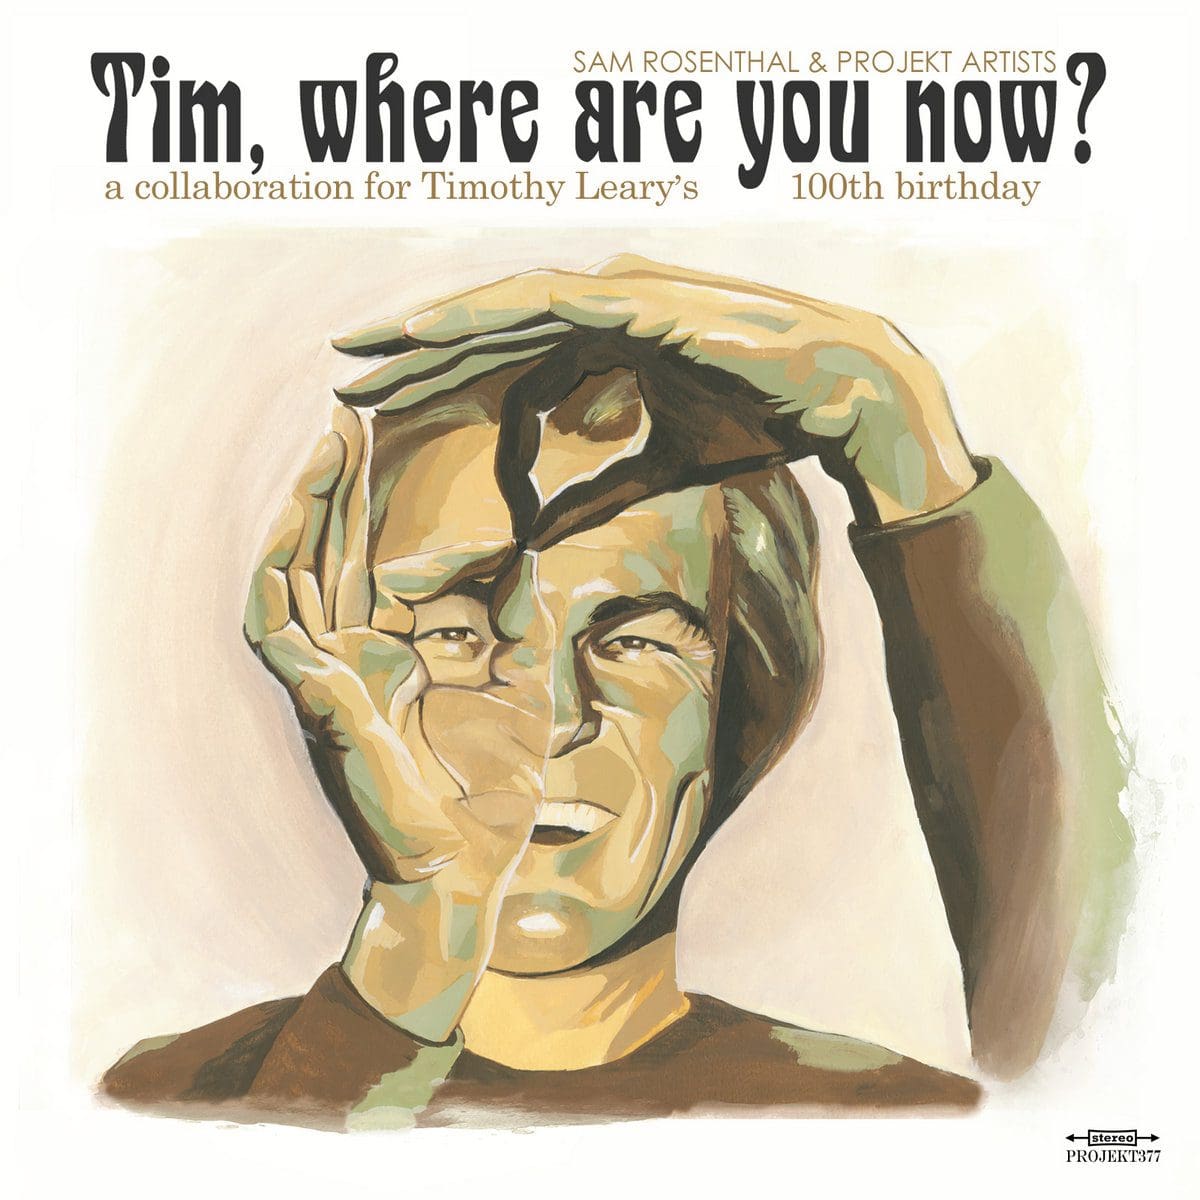 Tribute album to Timothy Leary by Sam Rosenthal and other Project artists